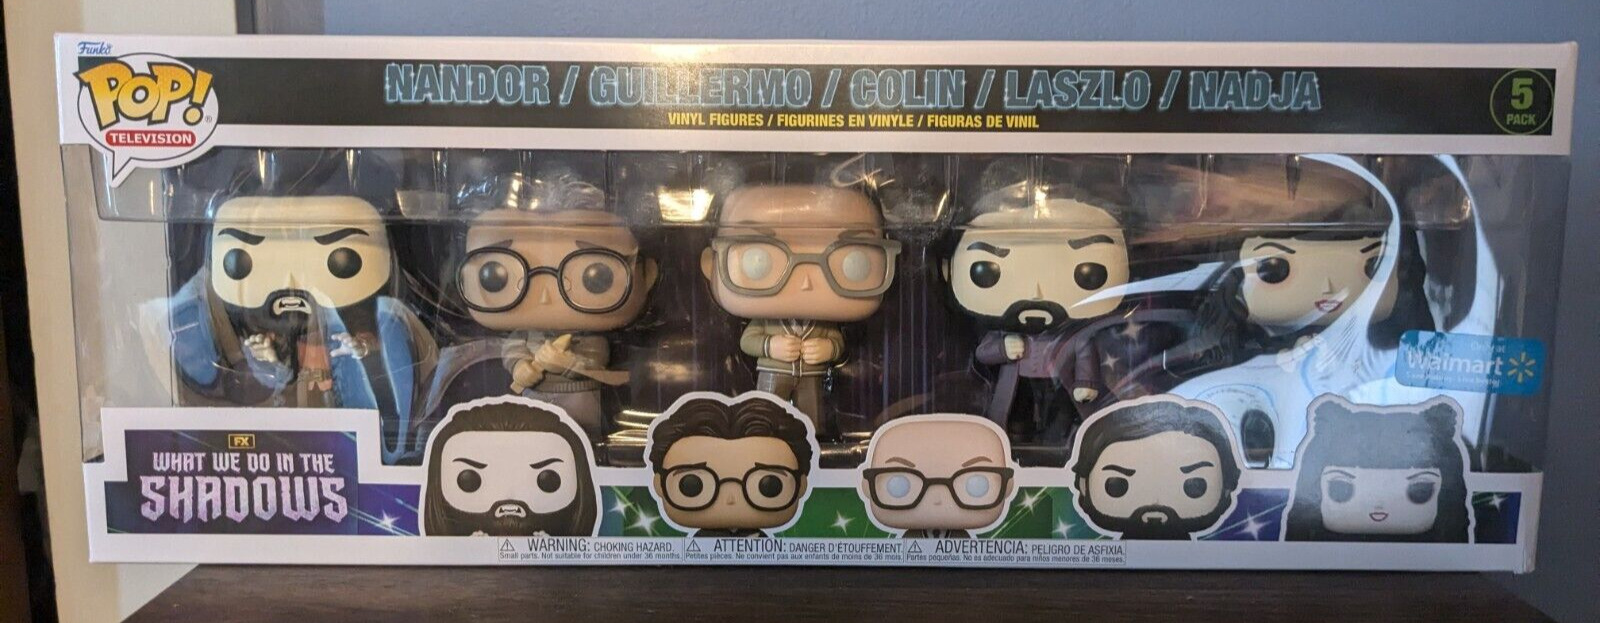 Funko Pop TV 5-Pack What We Do In The Shadows  Walmart Exclusive 